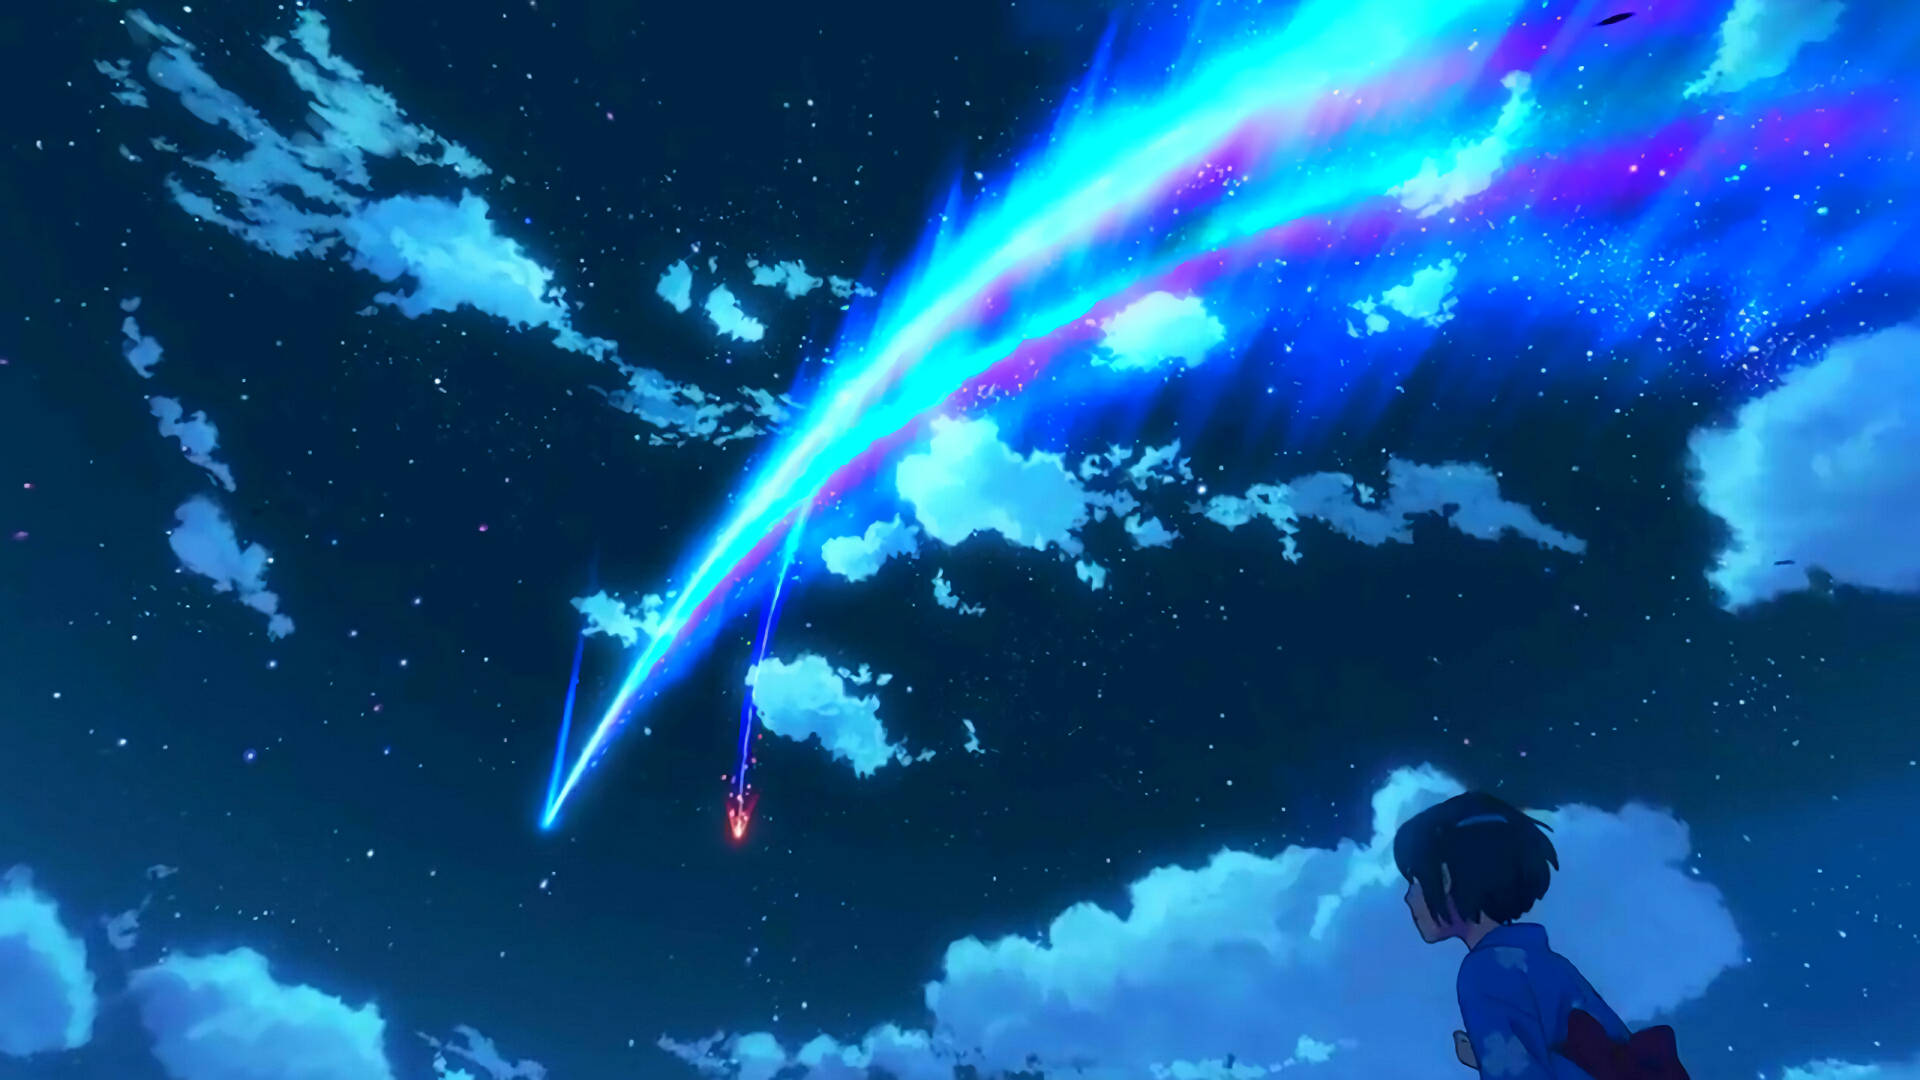 Your Name Anime Comet Scene Background